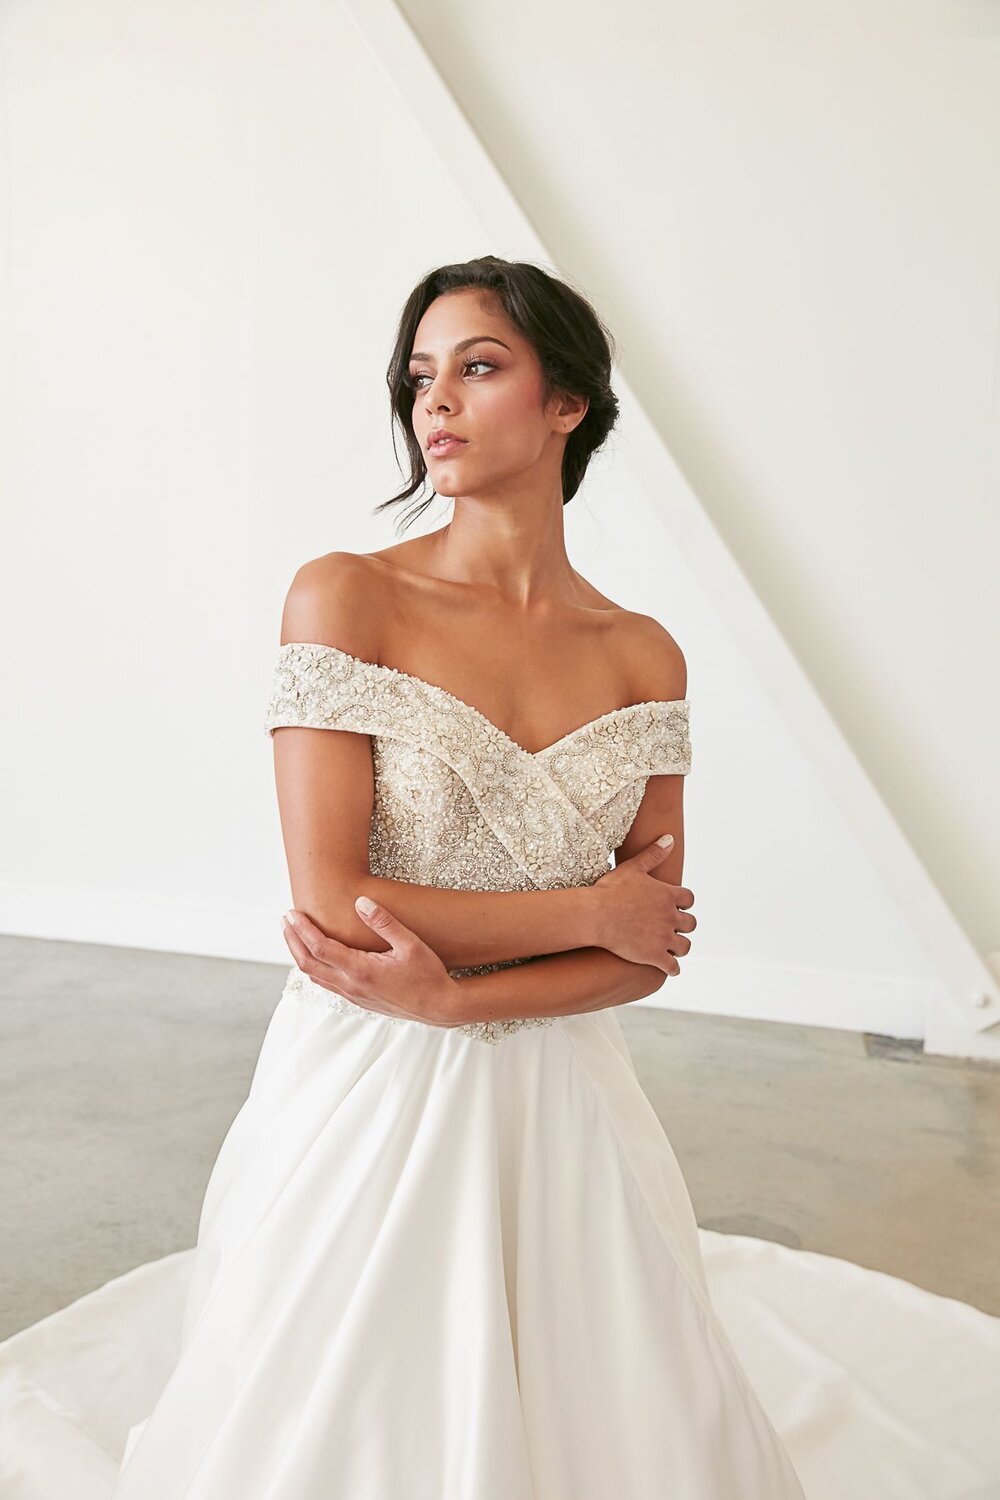 5 Wedding Dress Details to Consider When Shopping